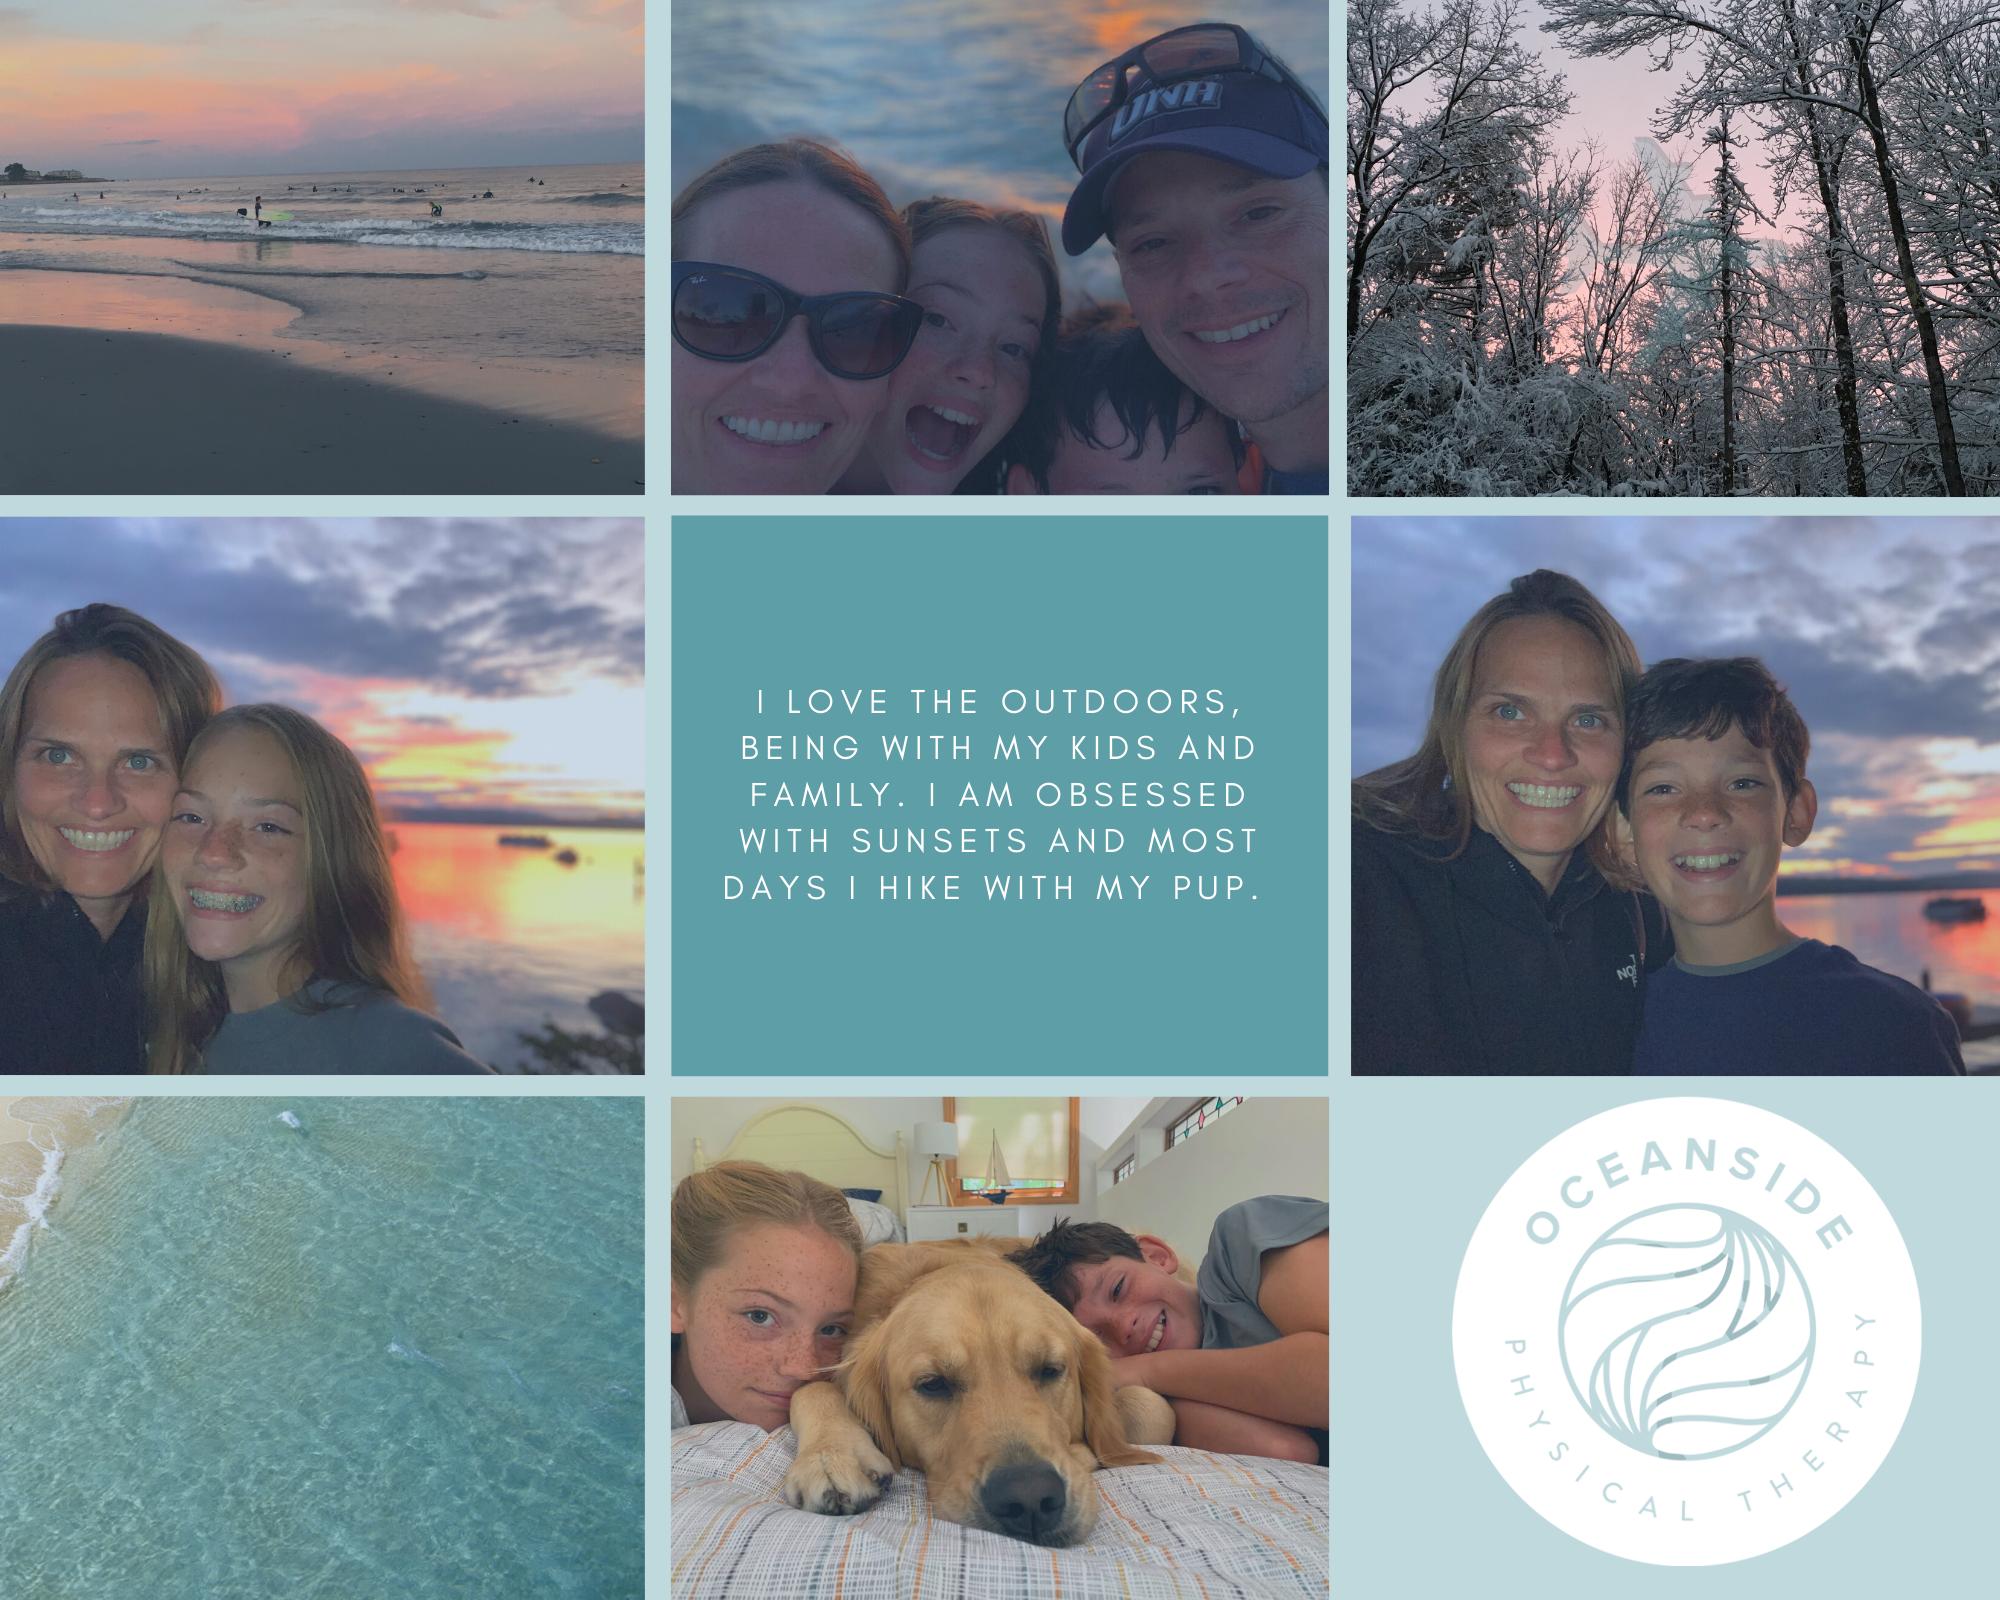 photo collage, top L to R: a beach, a family photo, snow-covered trees, middle L to R: mother and daughter, text block white over blue "I love the outdoors, being with my kids and faily. I am obsessed with sunsents and most days I hike with my pup," photo mother and son, bottom L to R, ocean, two kids with golden retriever, Oceanside Physical Therapy logo